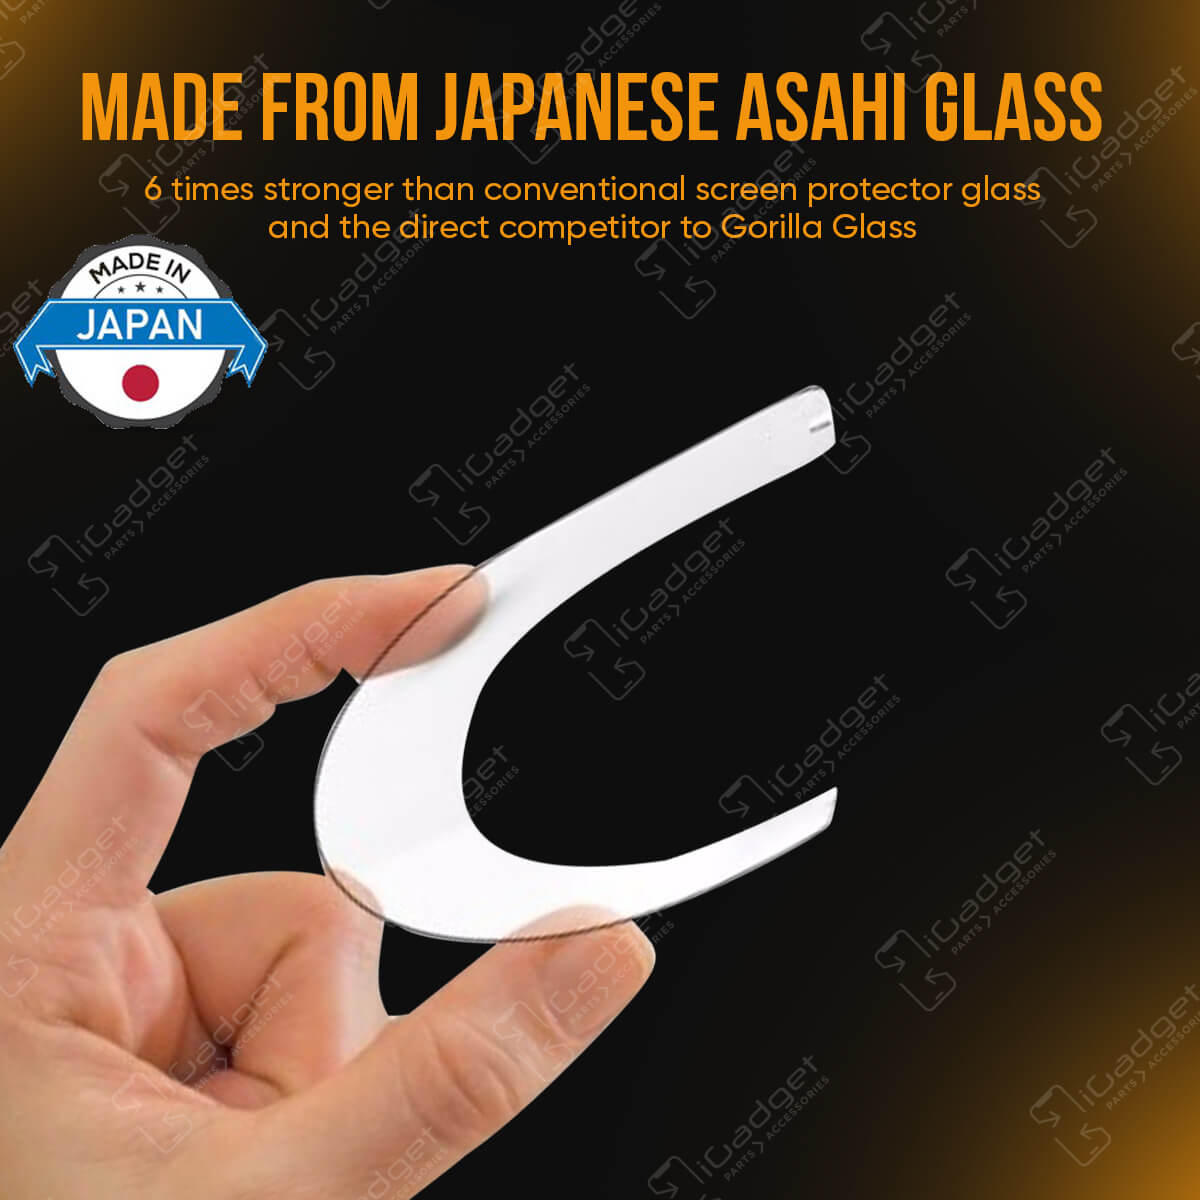 iGadget 3D Gummed Full Coverage Protector is made from japanese asahi glass which is 6 times stronger than other screen protector